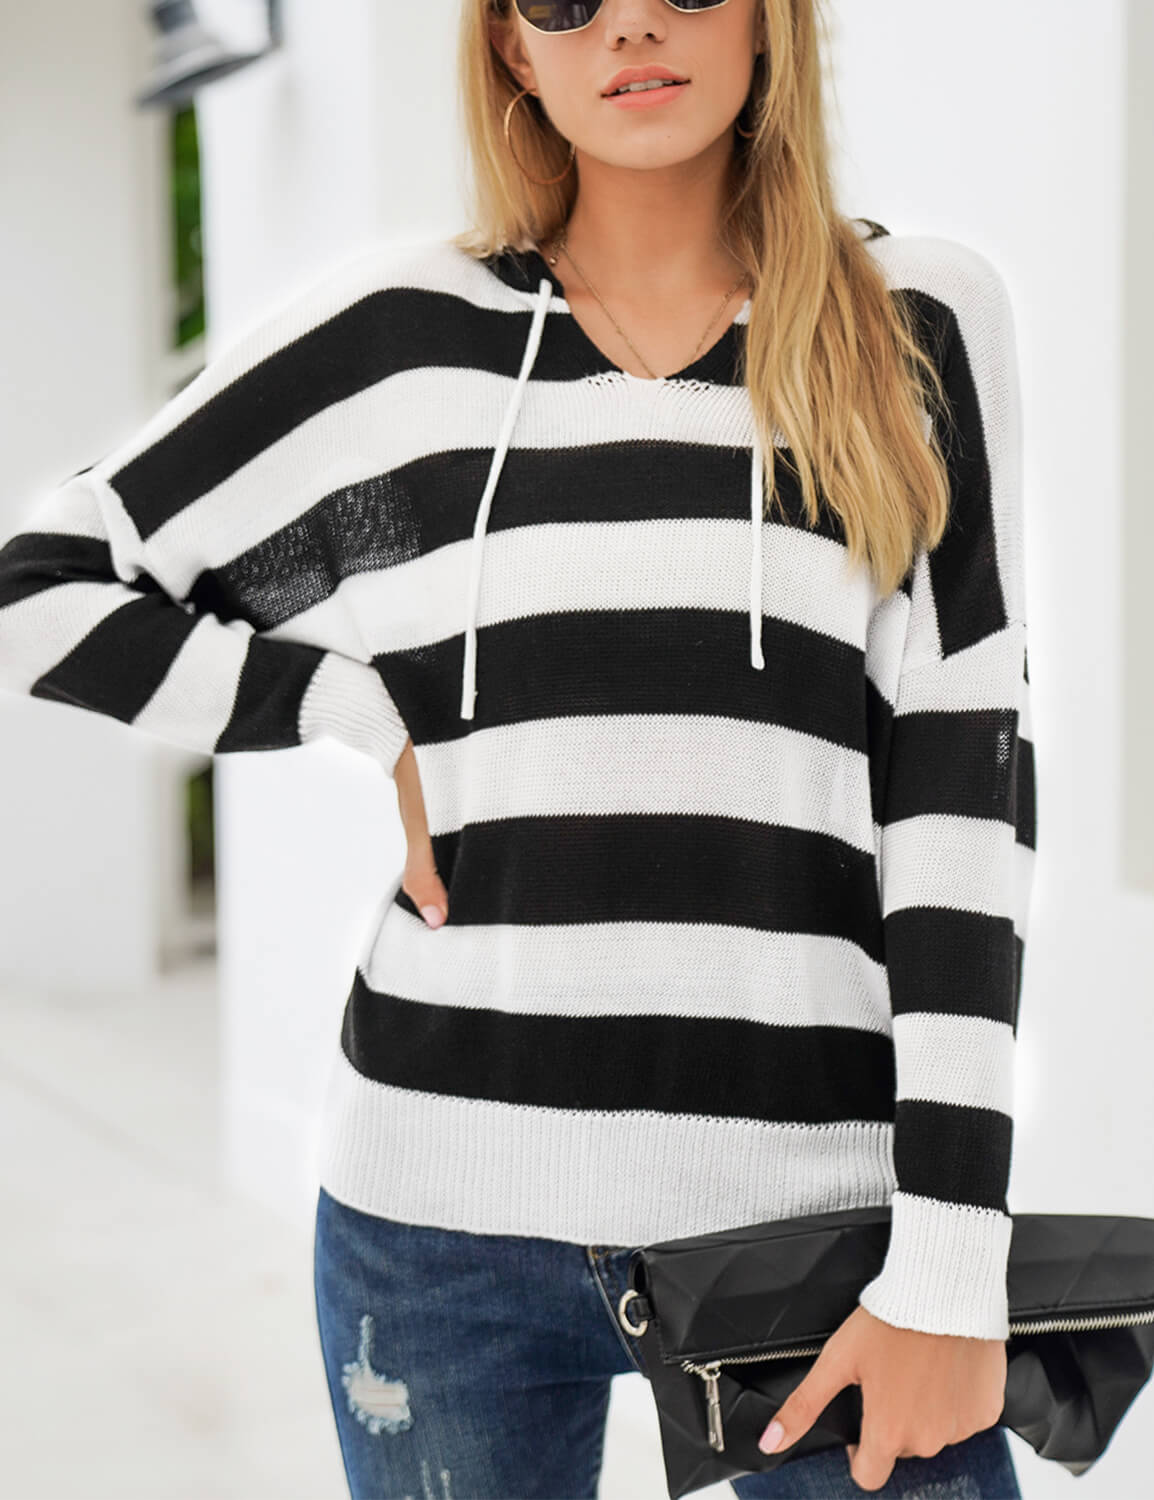 Blooming Jelly_Oversized Color Block Hoodie_White And Black_293061_02_Women Casual Style Outfits_Tops_Hoodie